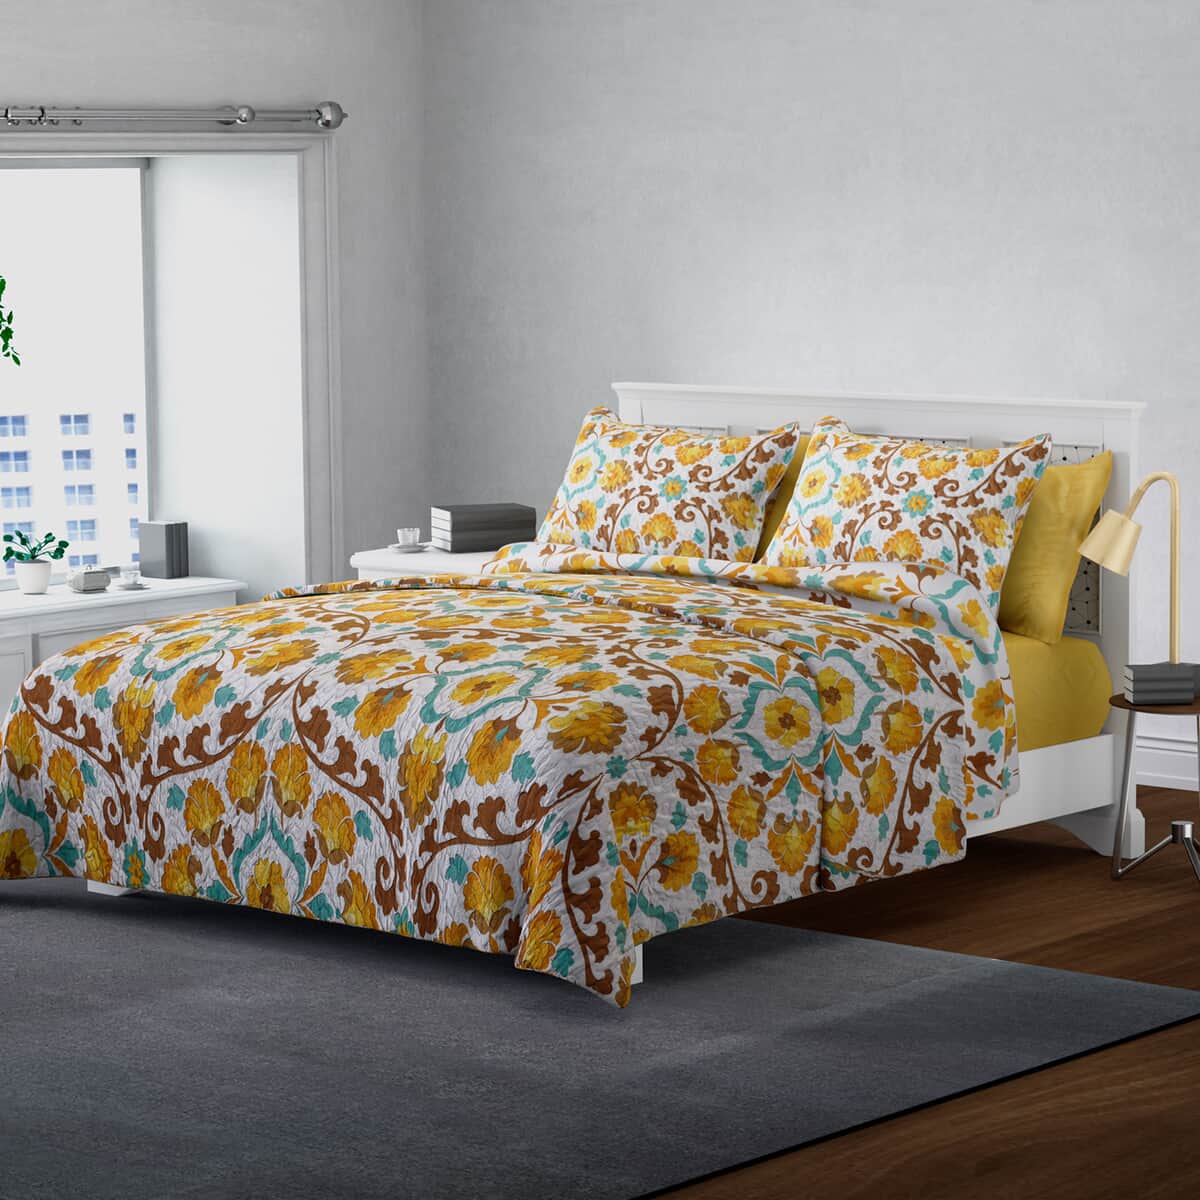 Homesmart Yellow Floral Print 7pc Quilt and Sheet Set - King (100% Microfiber) image number 0